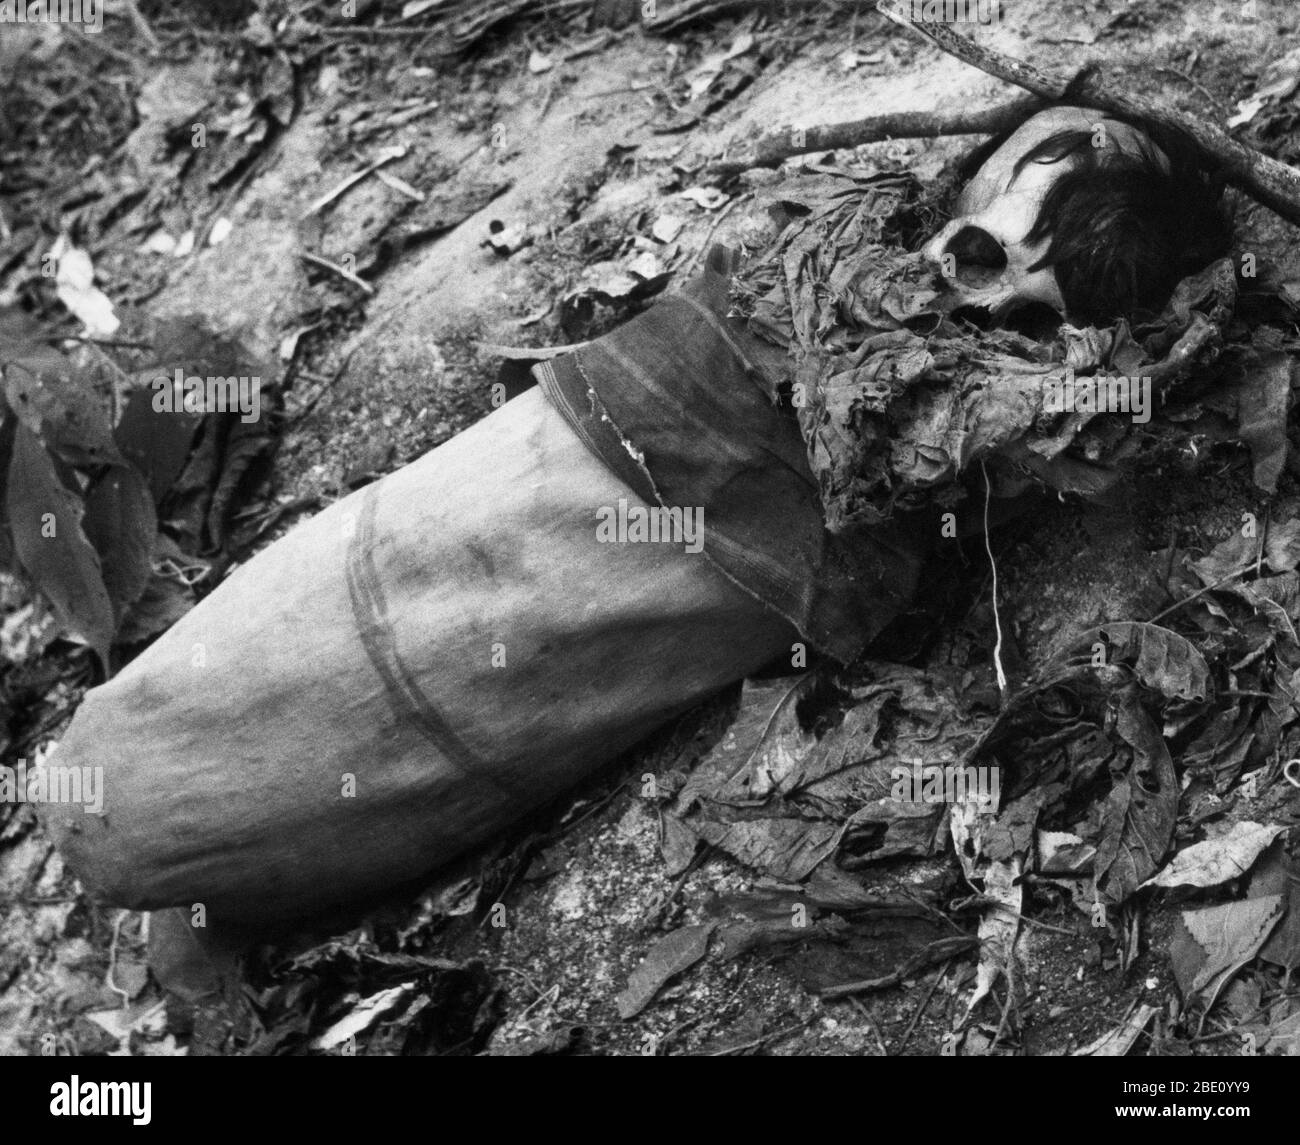 Remains of a Yukpa Indian, Sierra de Perija, Colombia, South America. Stock Photo